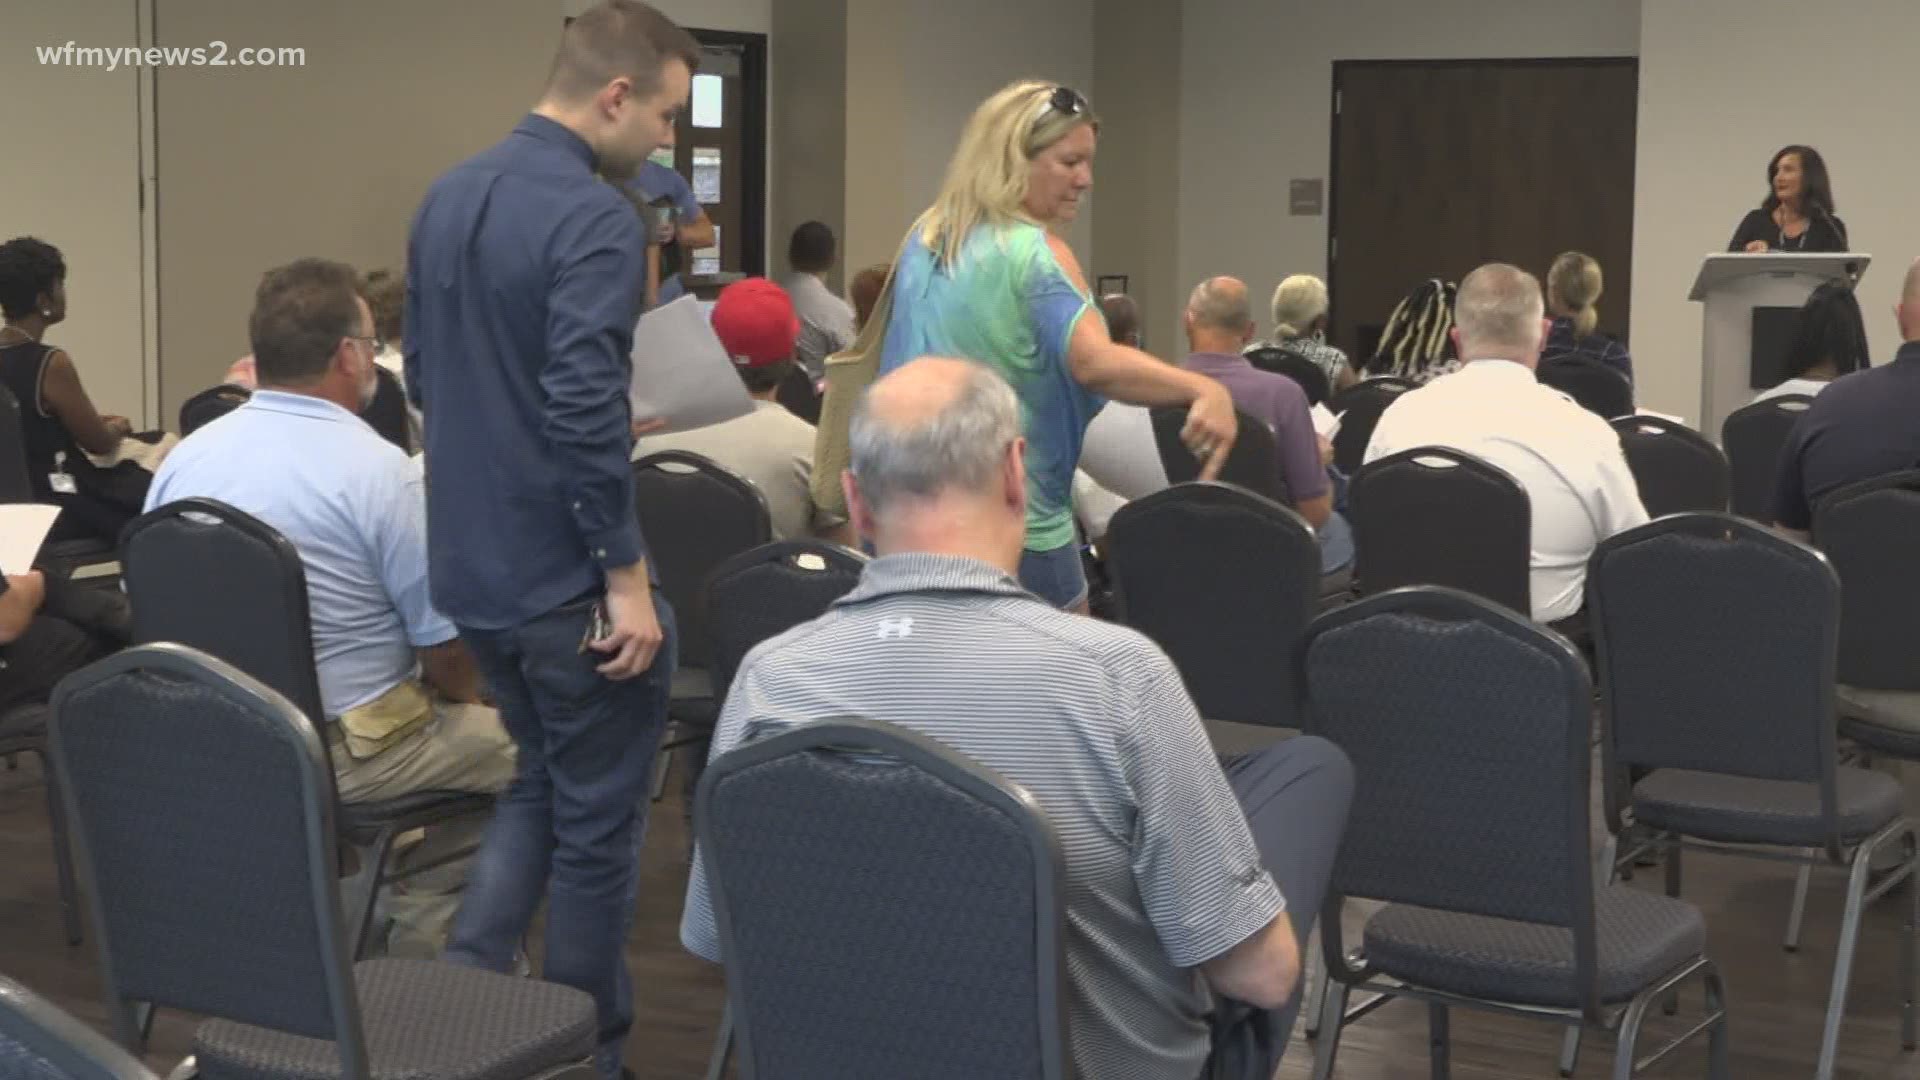 Greensboro held a town hall to discuss a proposal around safety at local businesses. Businesses owners shared their thoughts.